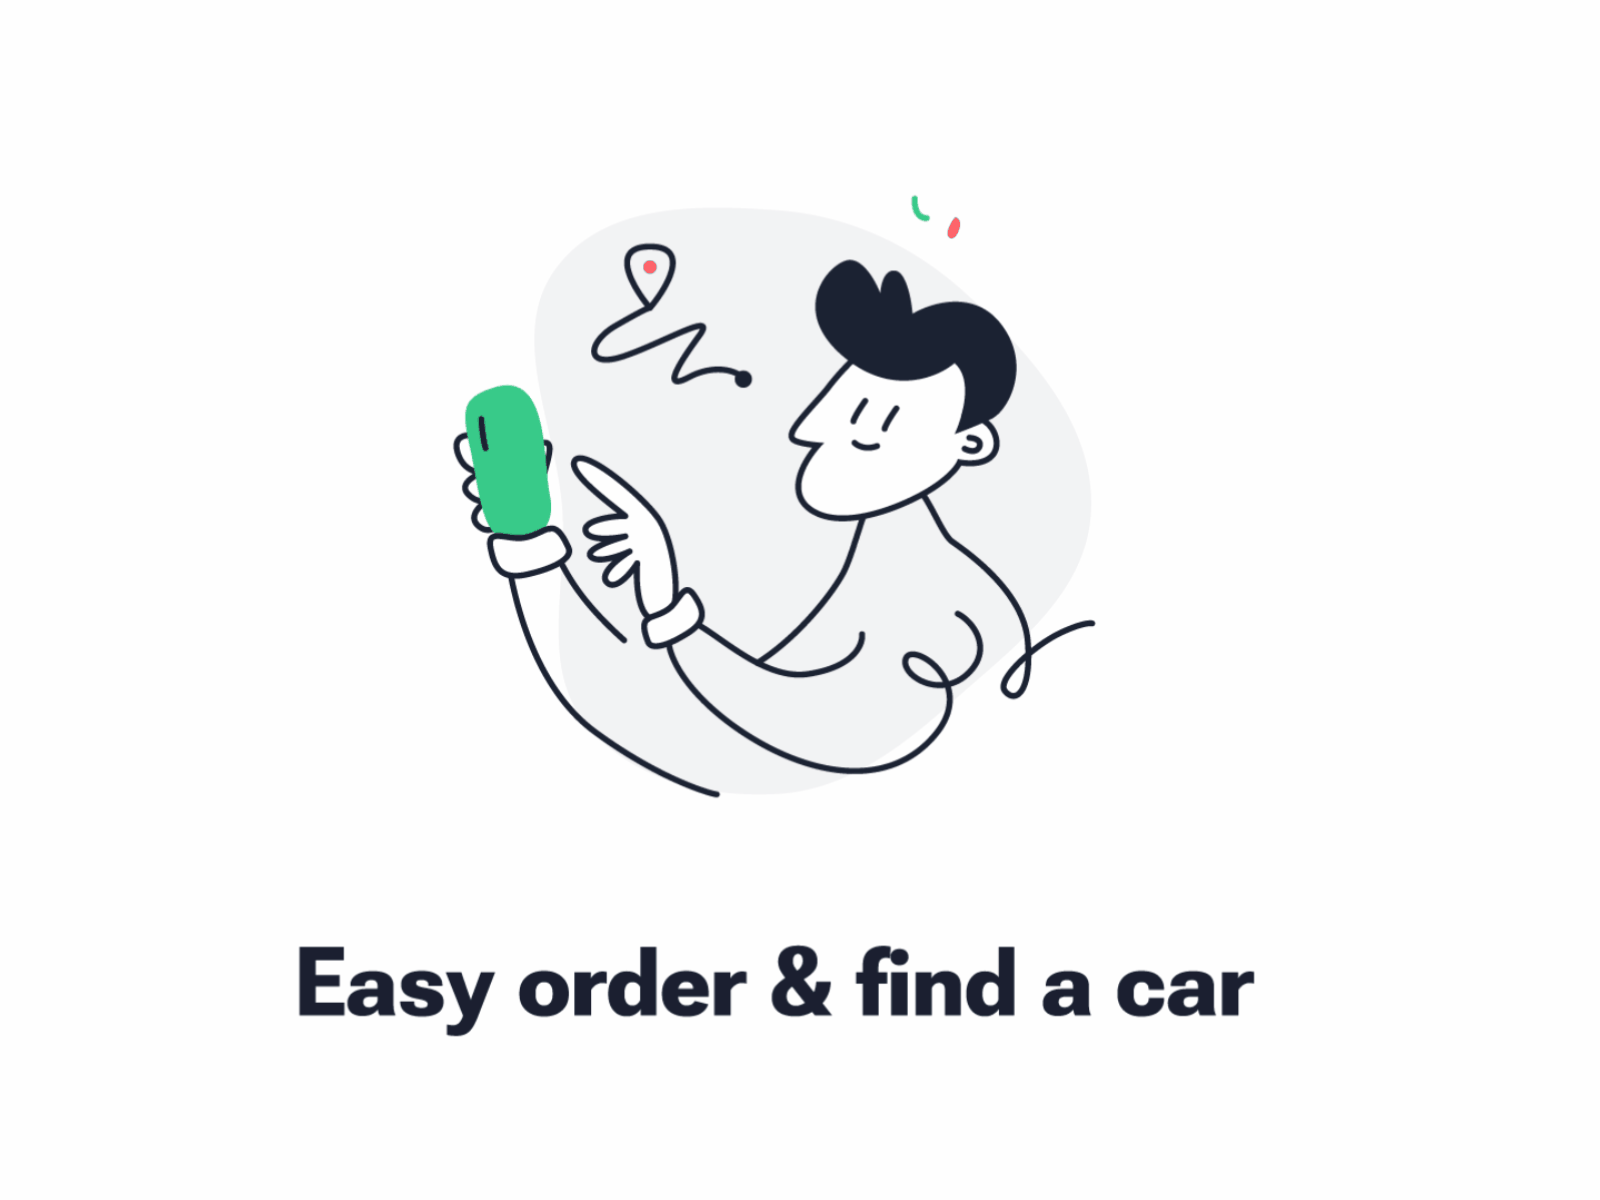 Onboarding animation for a taxi app